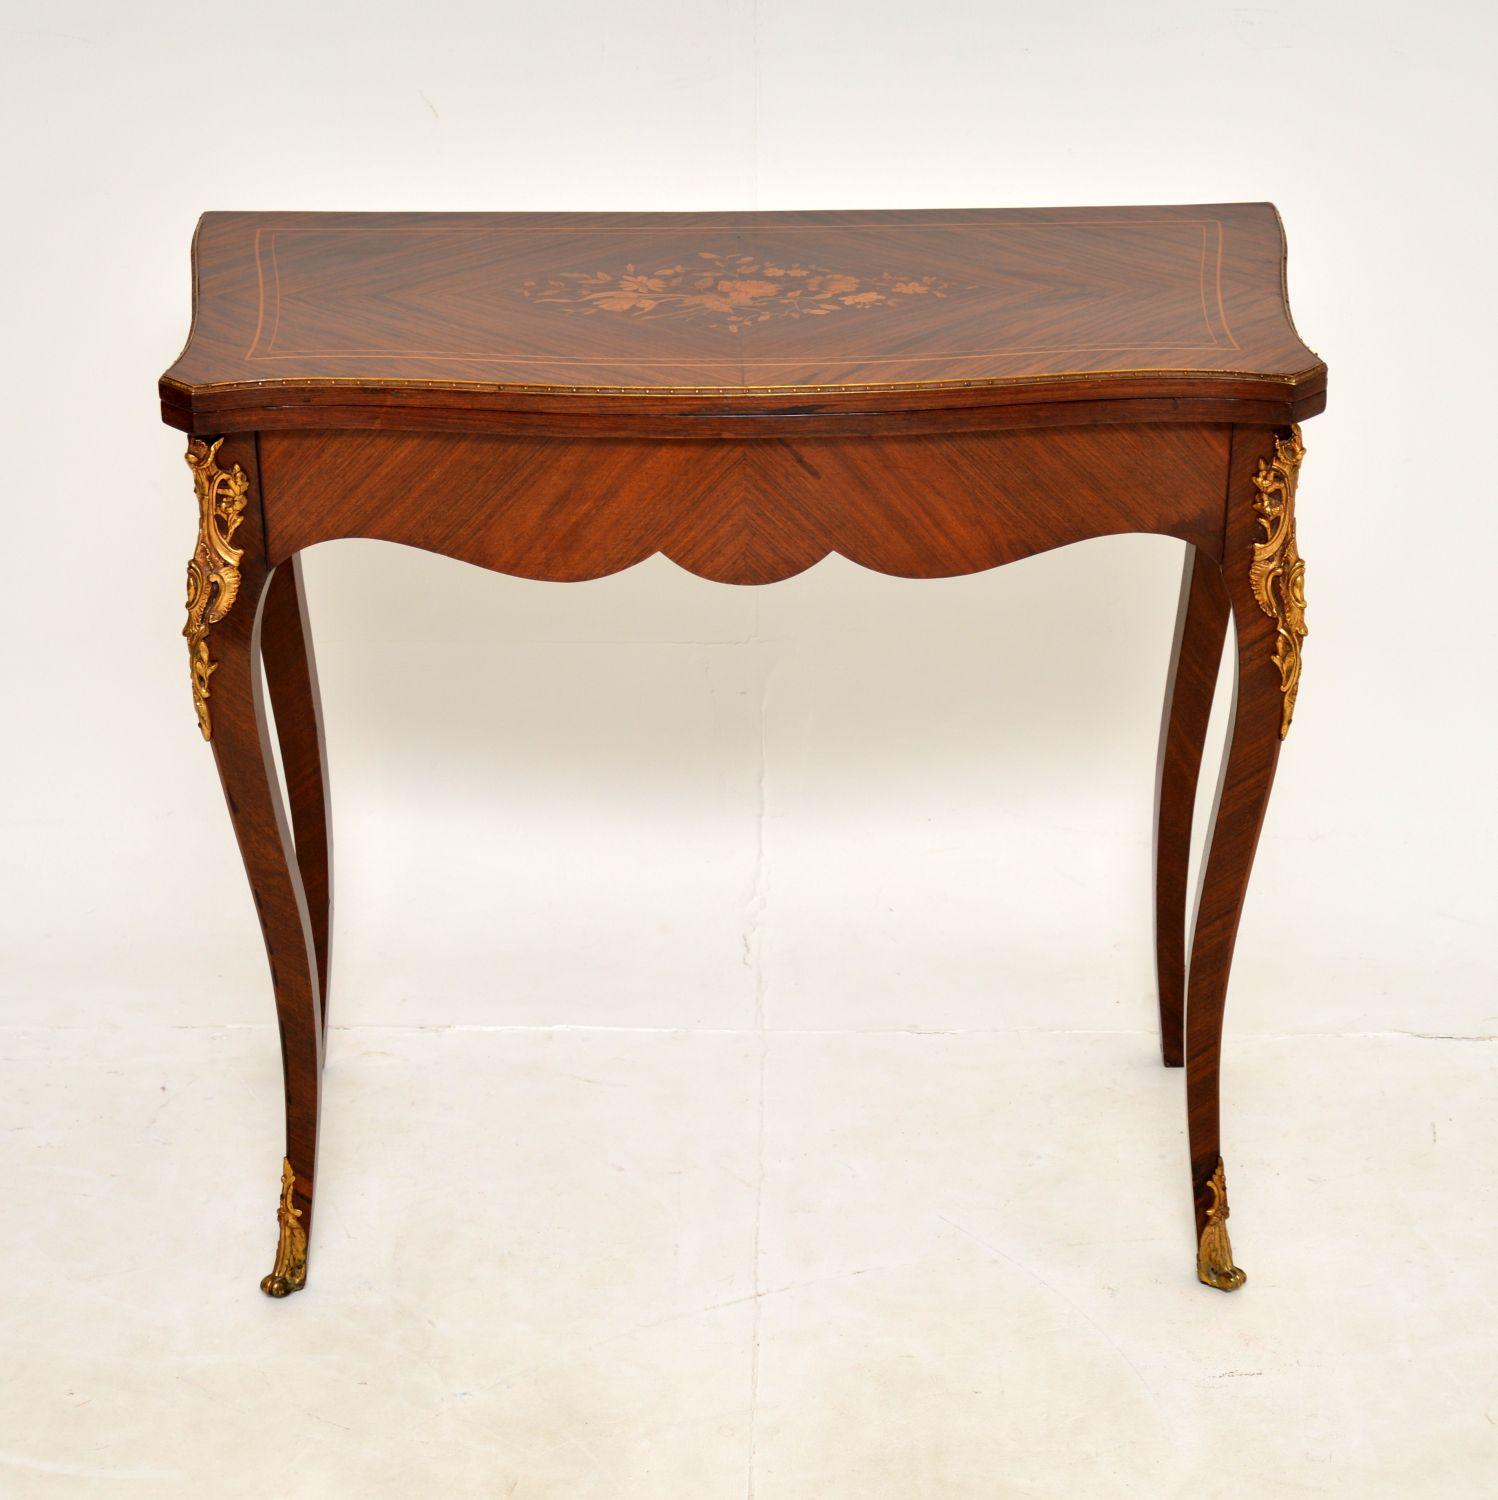 A stunning and elegant antique French card table in wood, dating from around the 1900-1920 period.
This is of amazing quality, and is beautifully designed. The construction is all solid wood, with incredible veneers all over the top, sides and